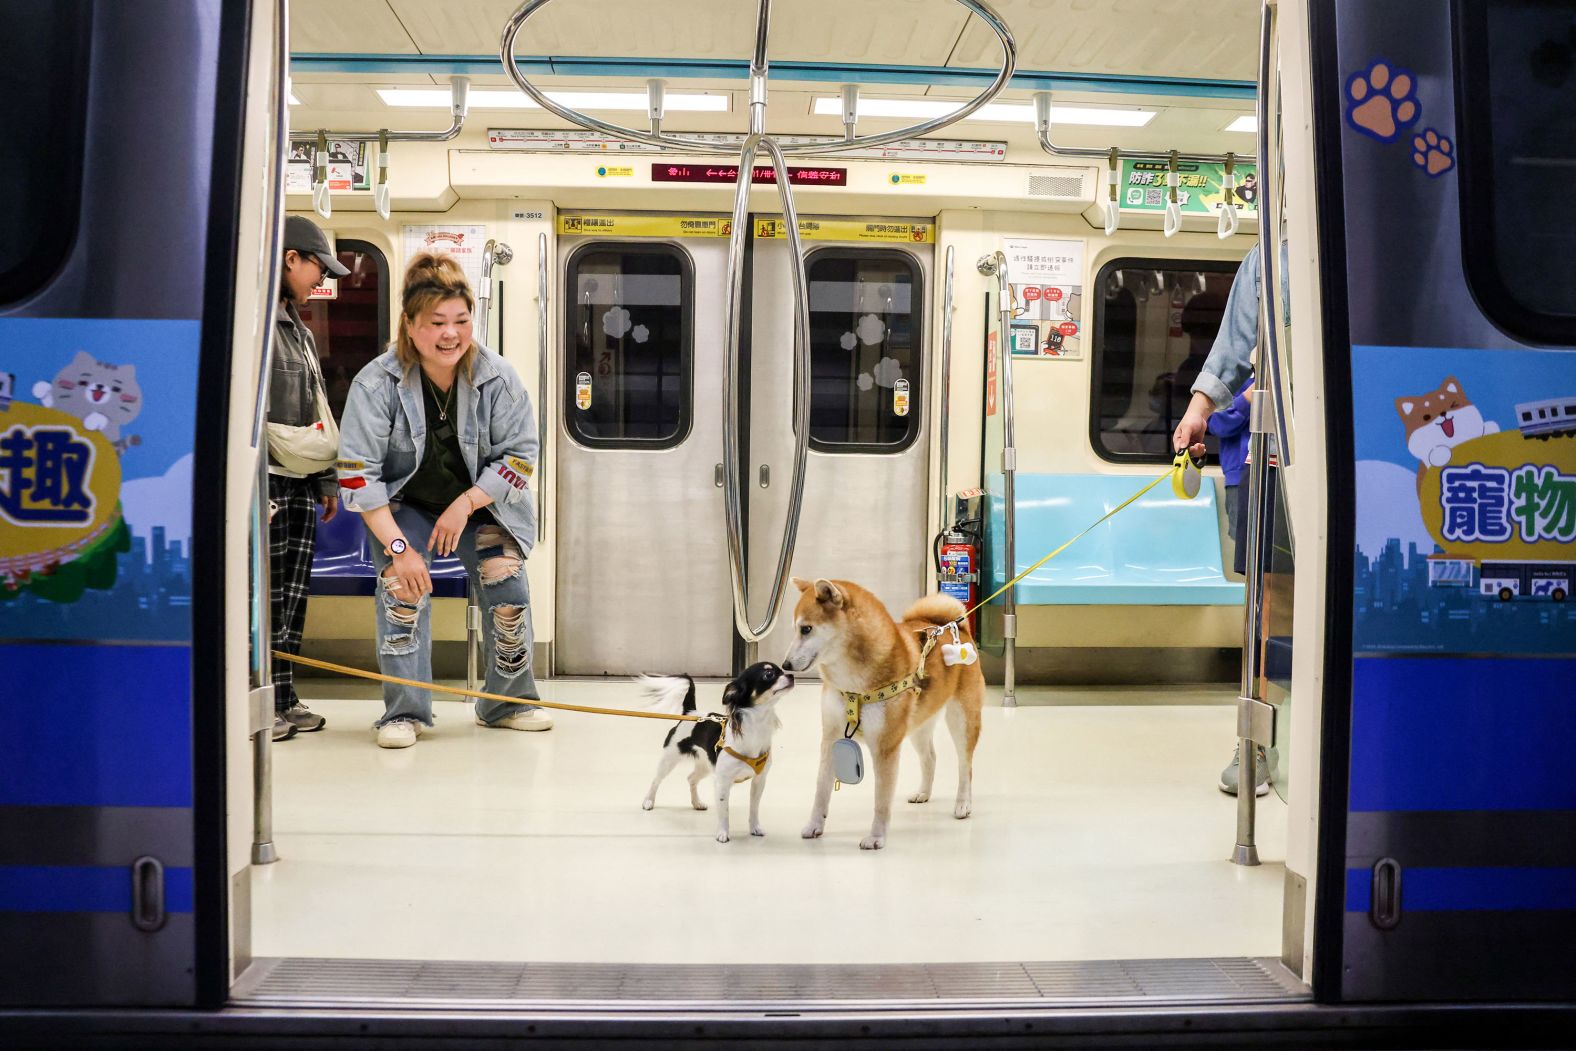 Dogs interact with each other on a Taipei Metro train in Taiwan on Sunday, March 31. The Taipei Metro has started operating two pet-friendly trains along its Red Line.